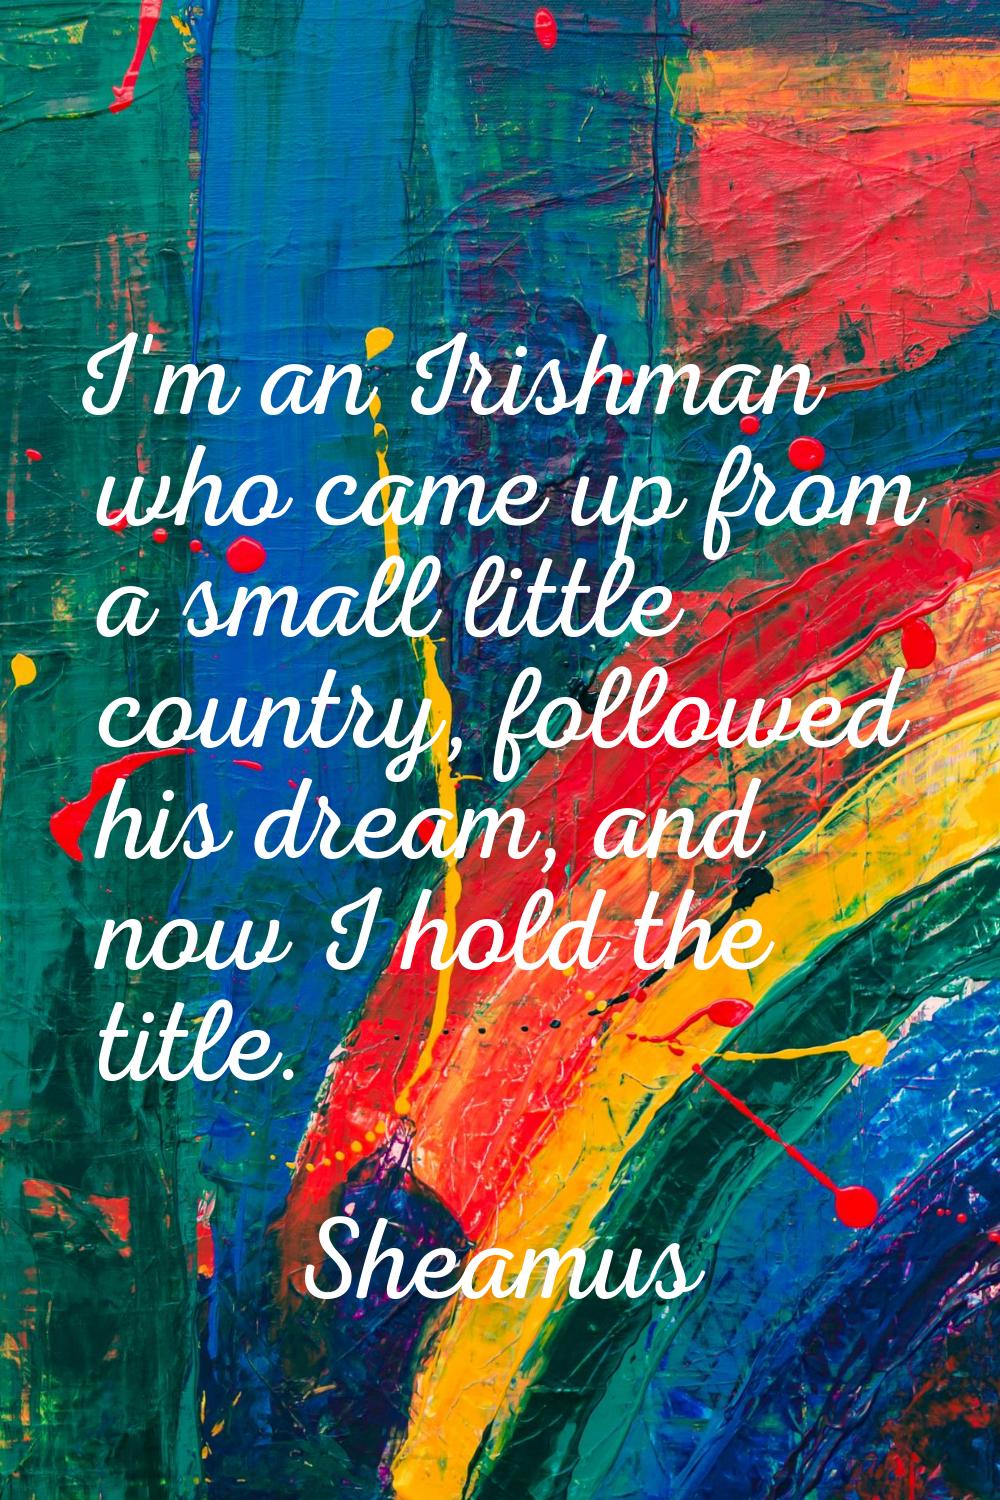 I'm an Irishman who came up from a small little country, followed his dream, and now I hold the tit